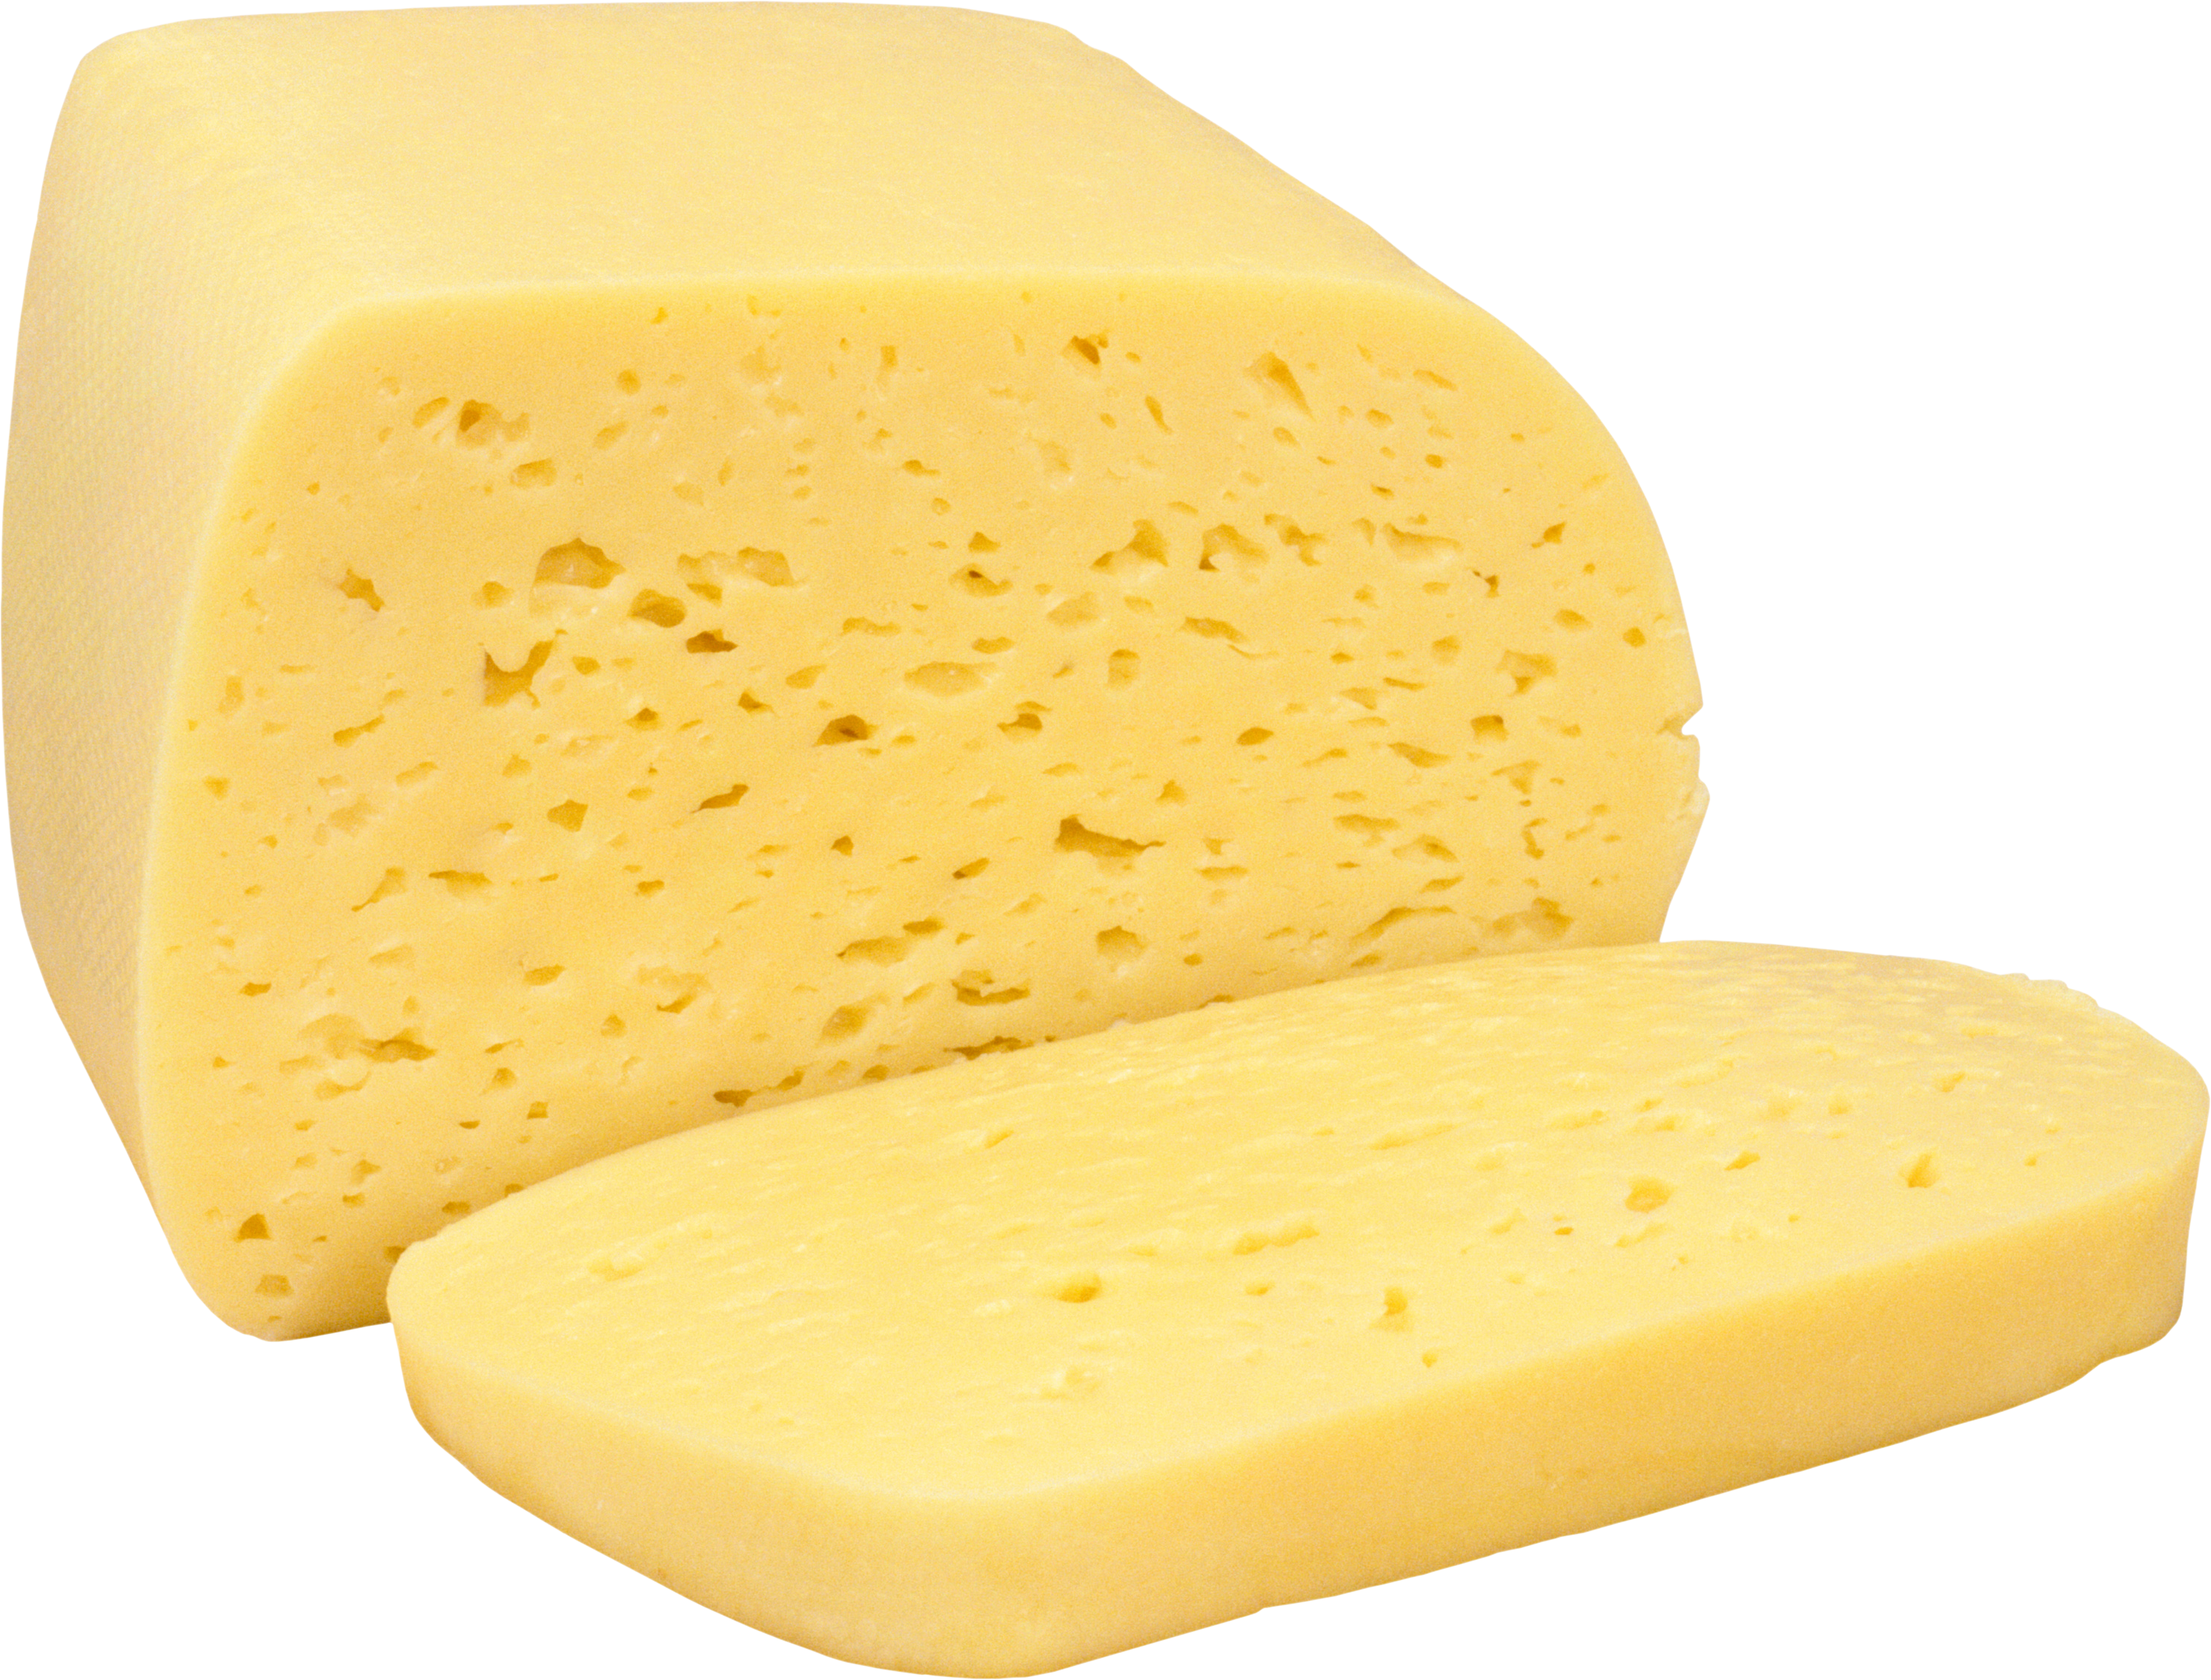 Cheese Png Transparent Image Download Size 2983x2267px